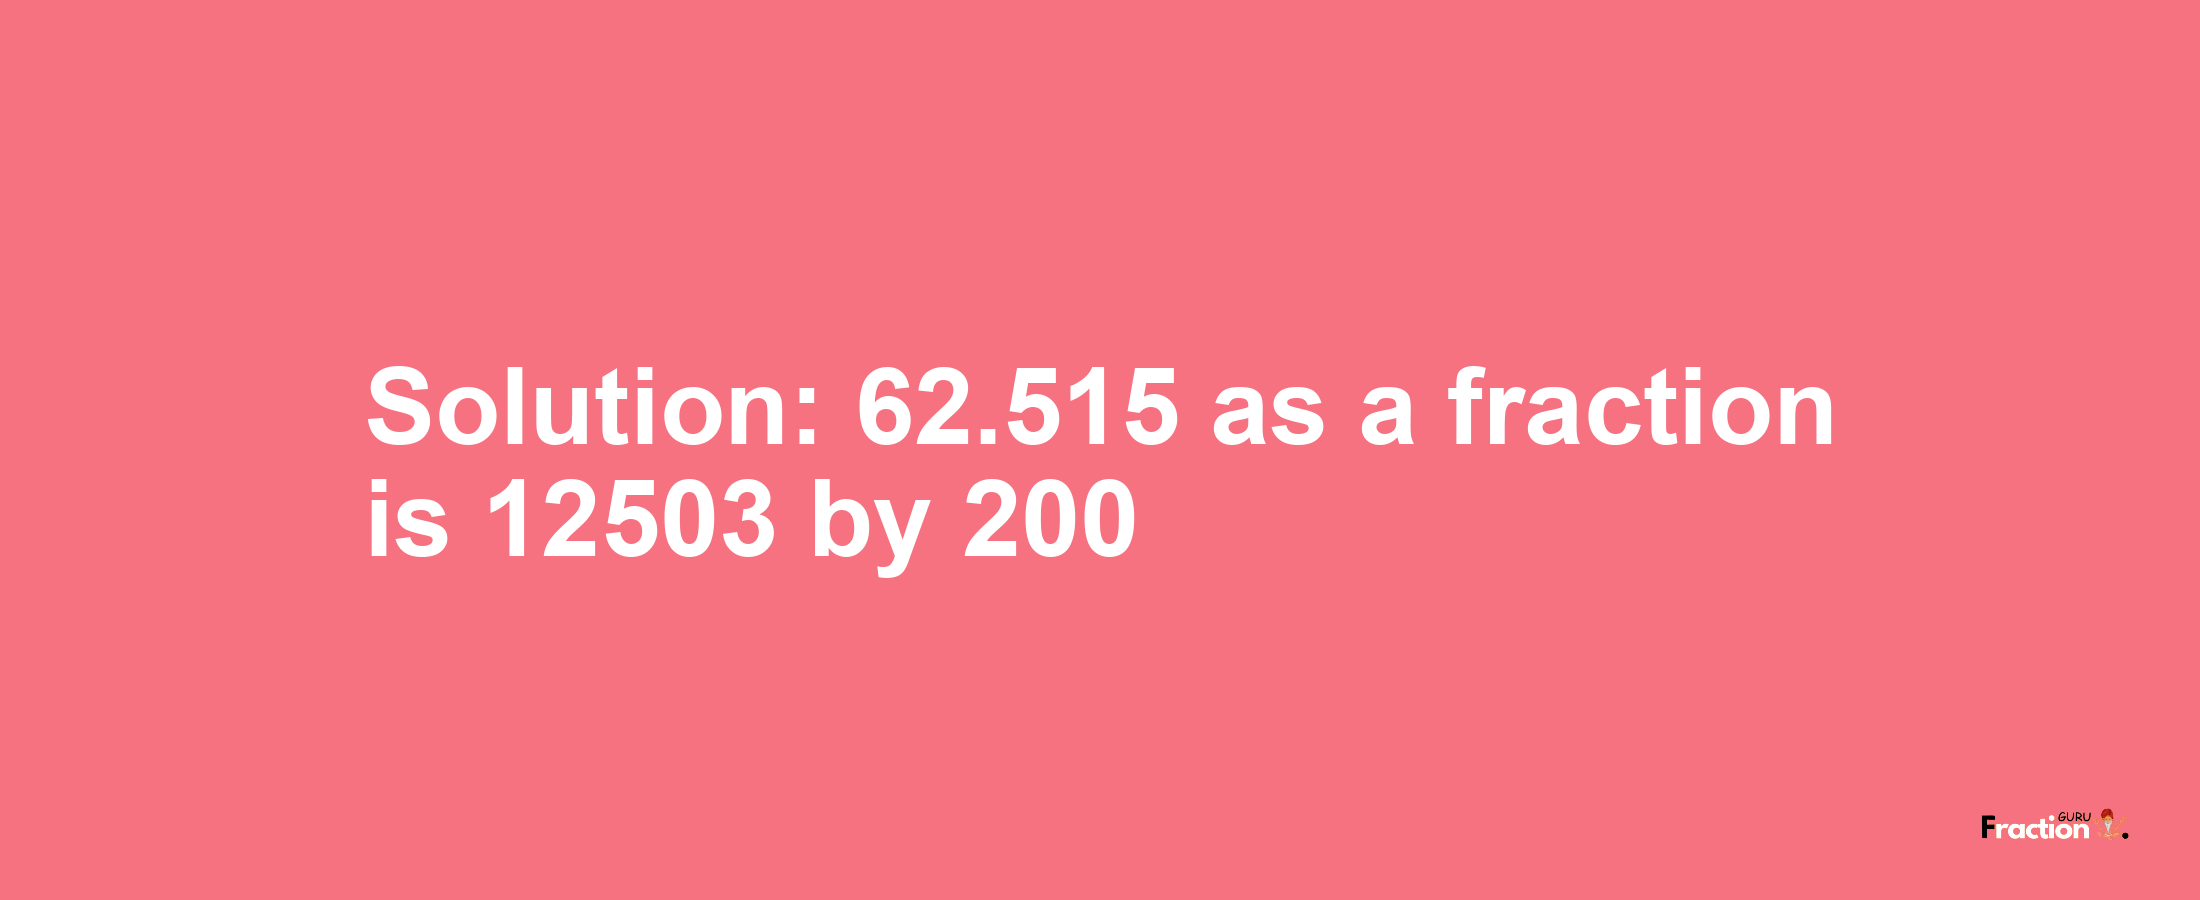 Solution:62.515 as a fraction is 12503/200